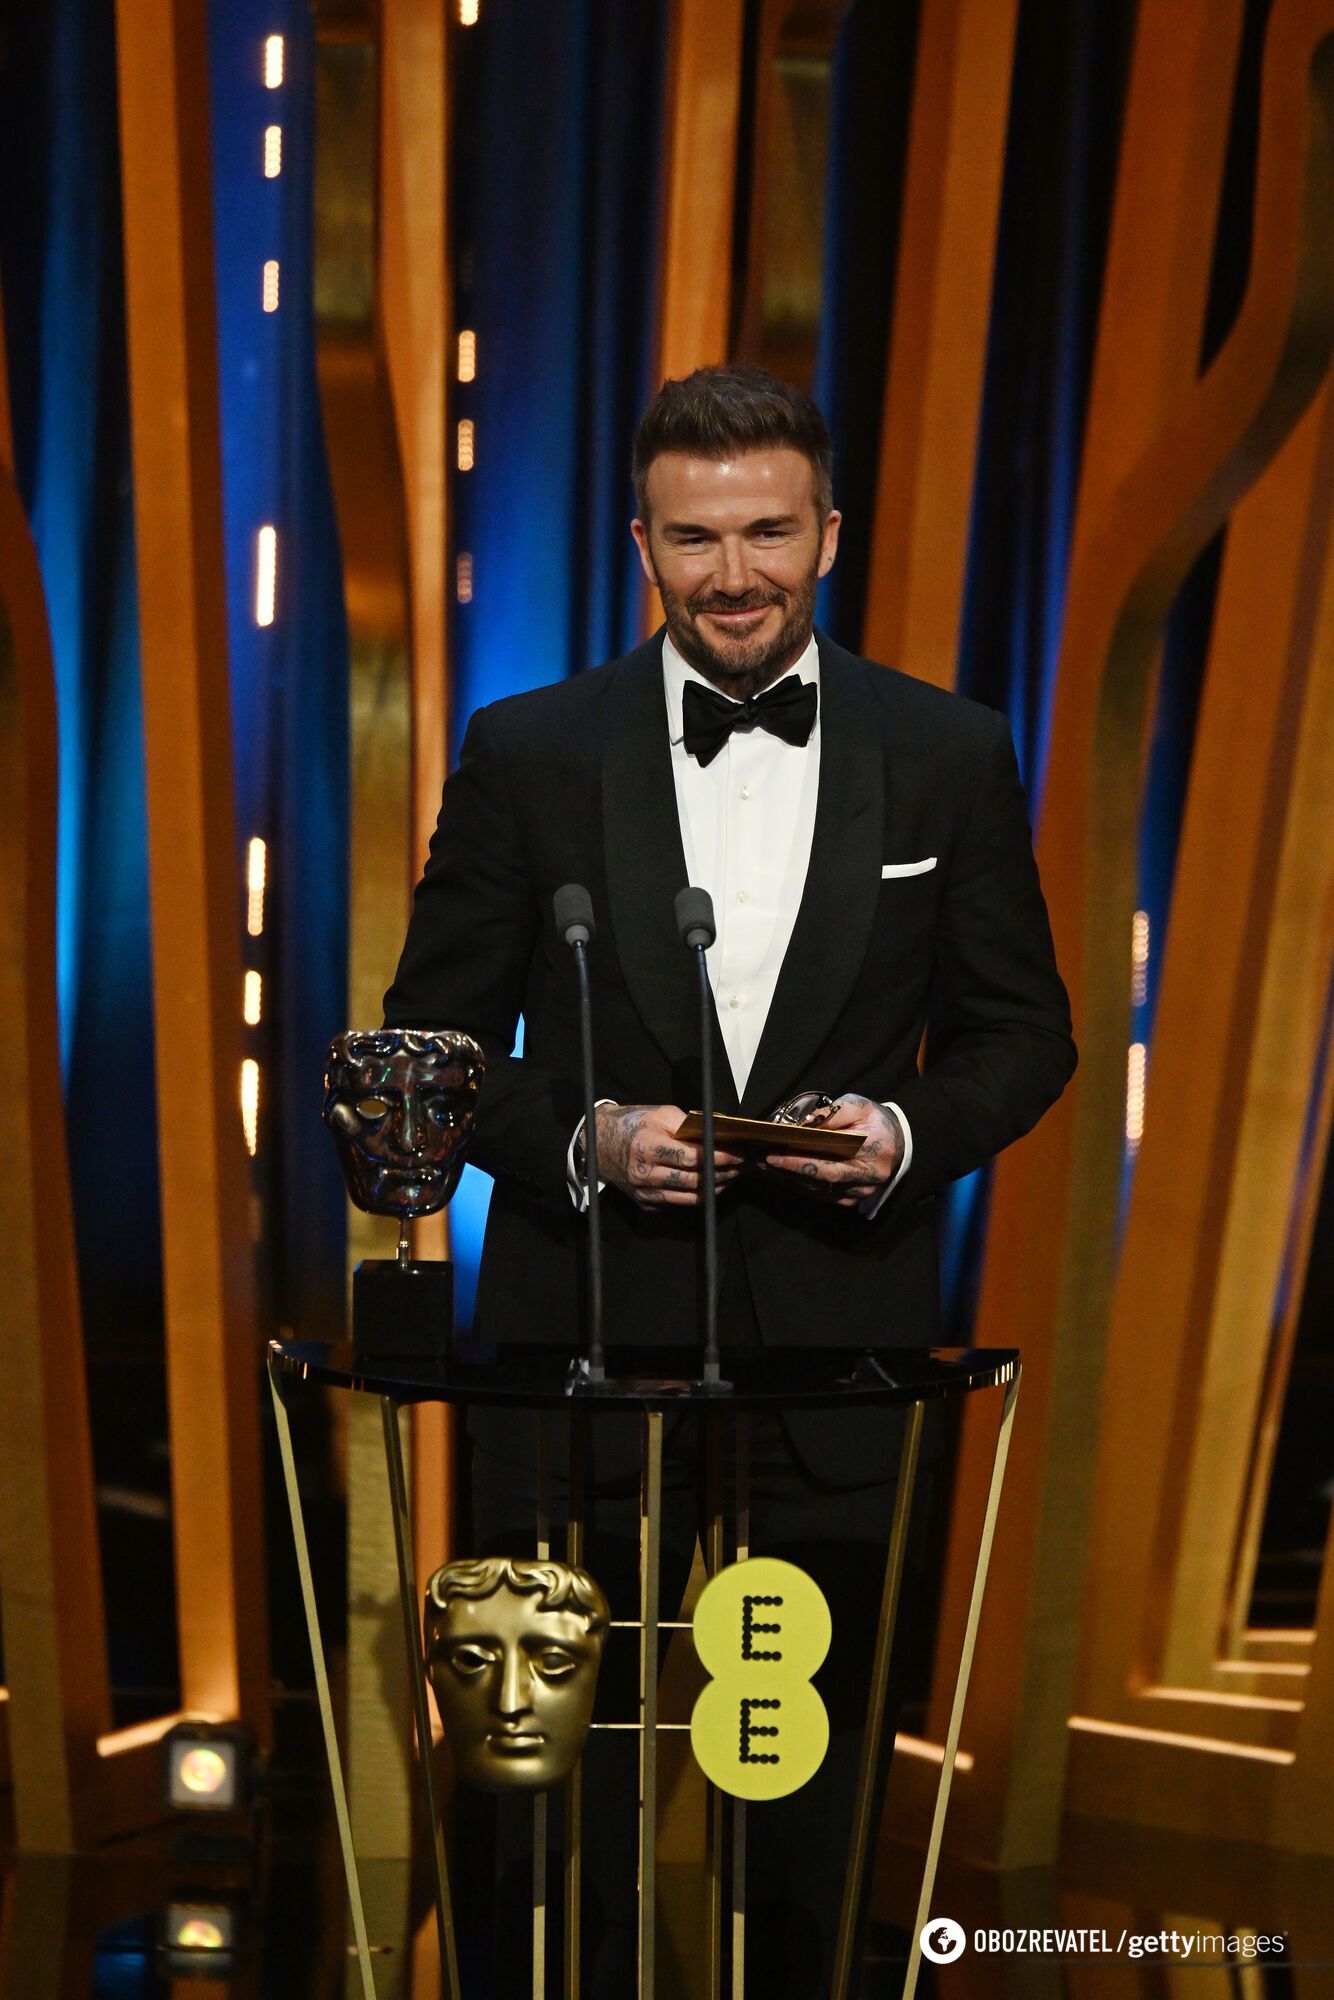 David Beckham enraged the British around the world by saying one word from the BAFTA stage